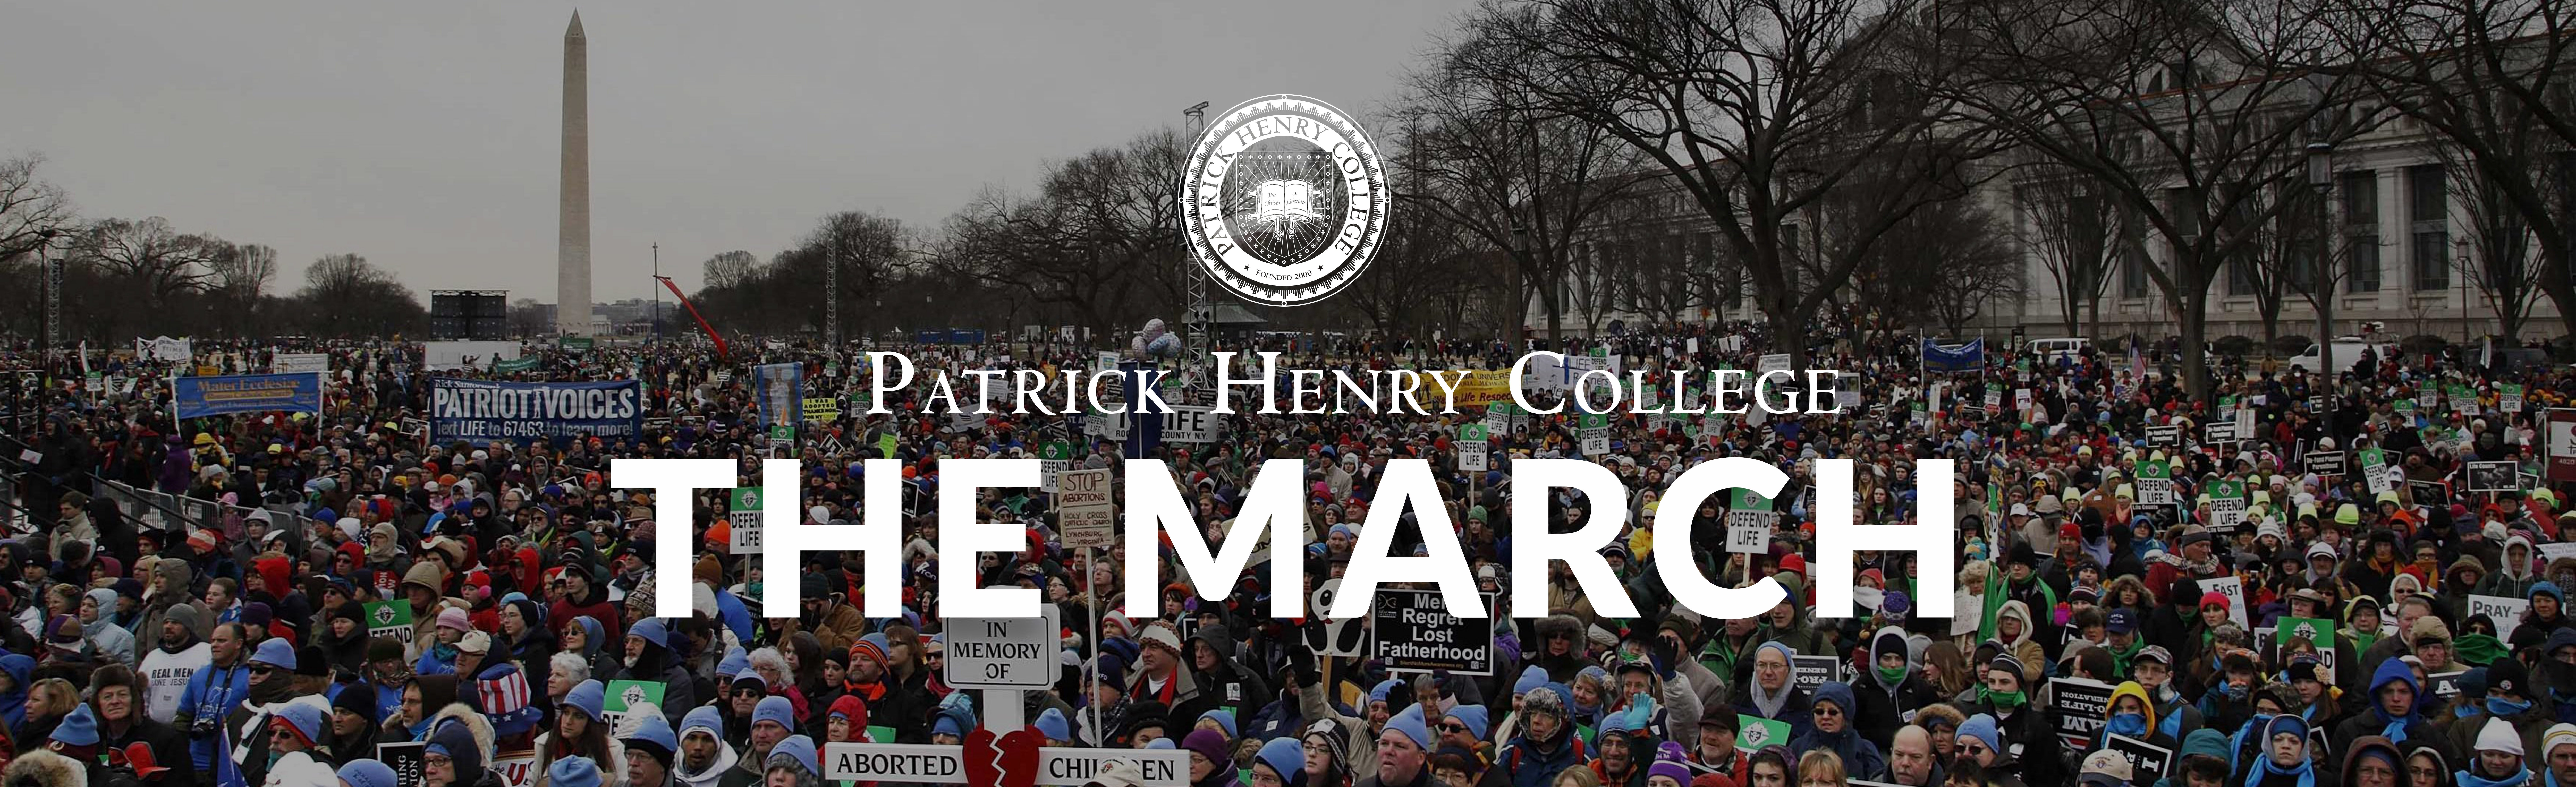 Will you march with us?